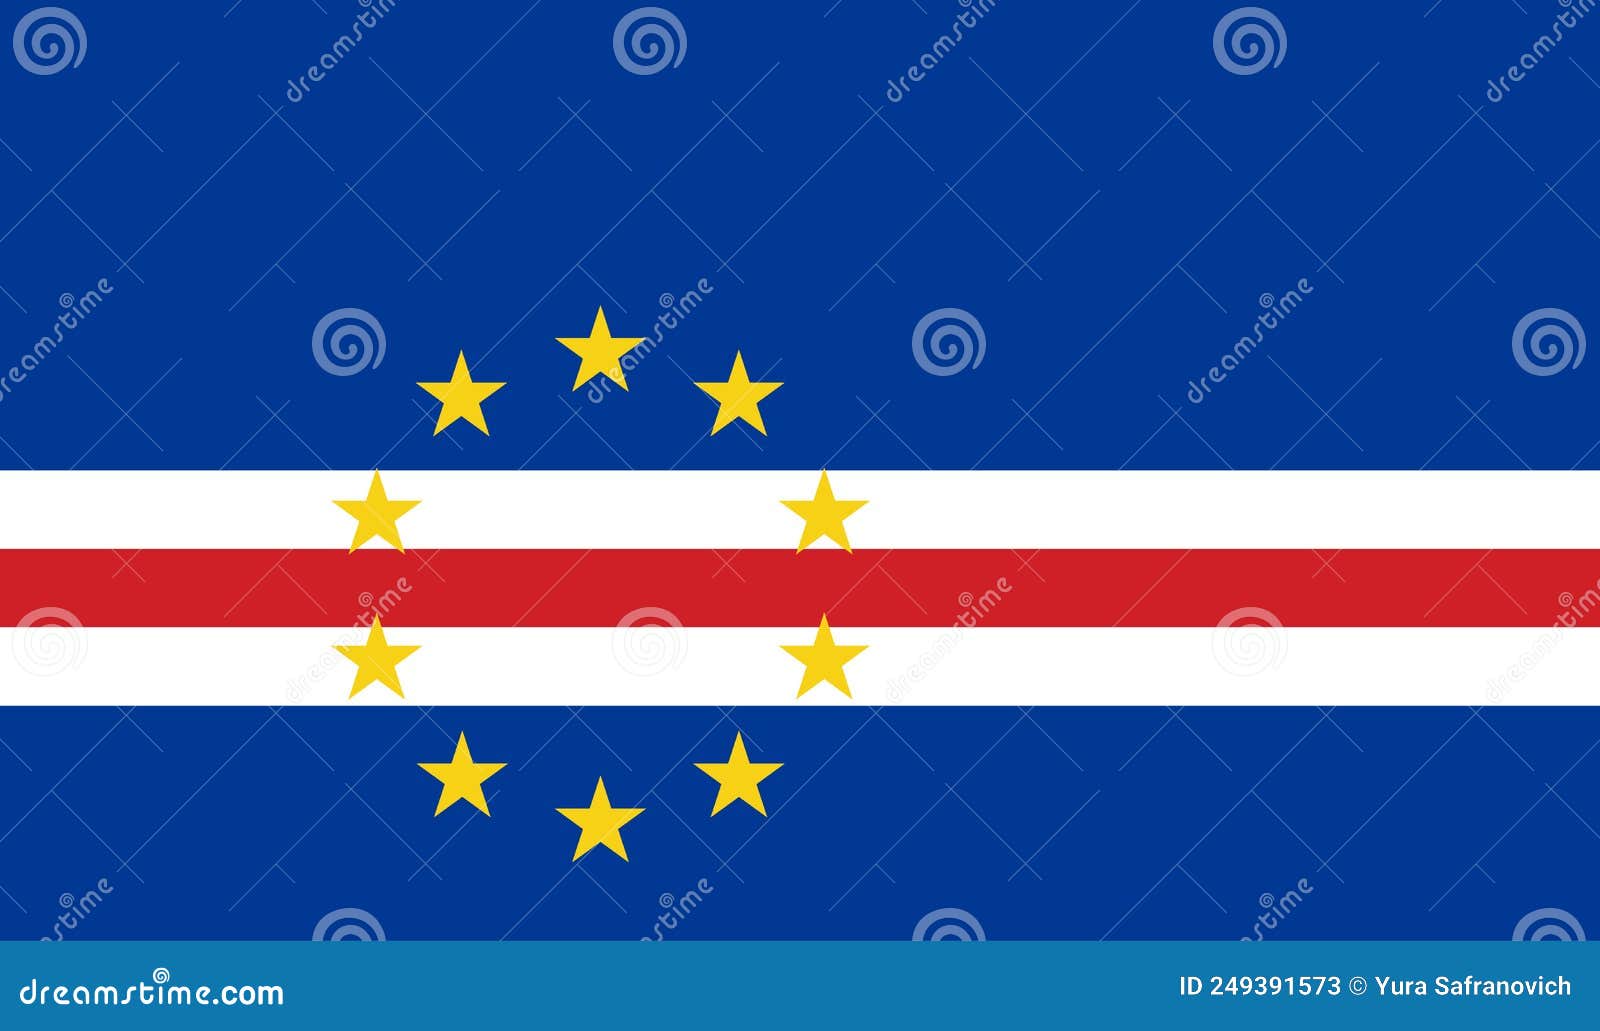 cabo verde flag with official proportions and color.genuine.original cabo verde flag